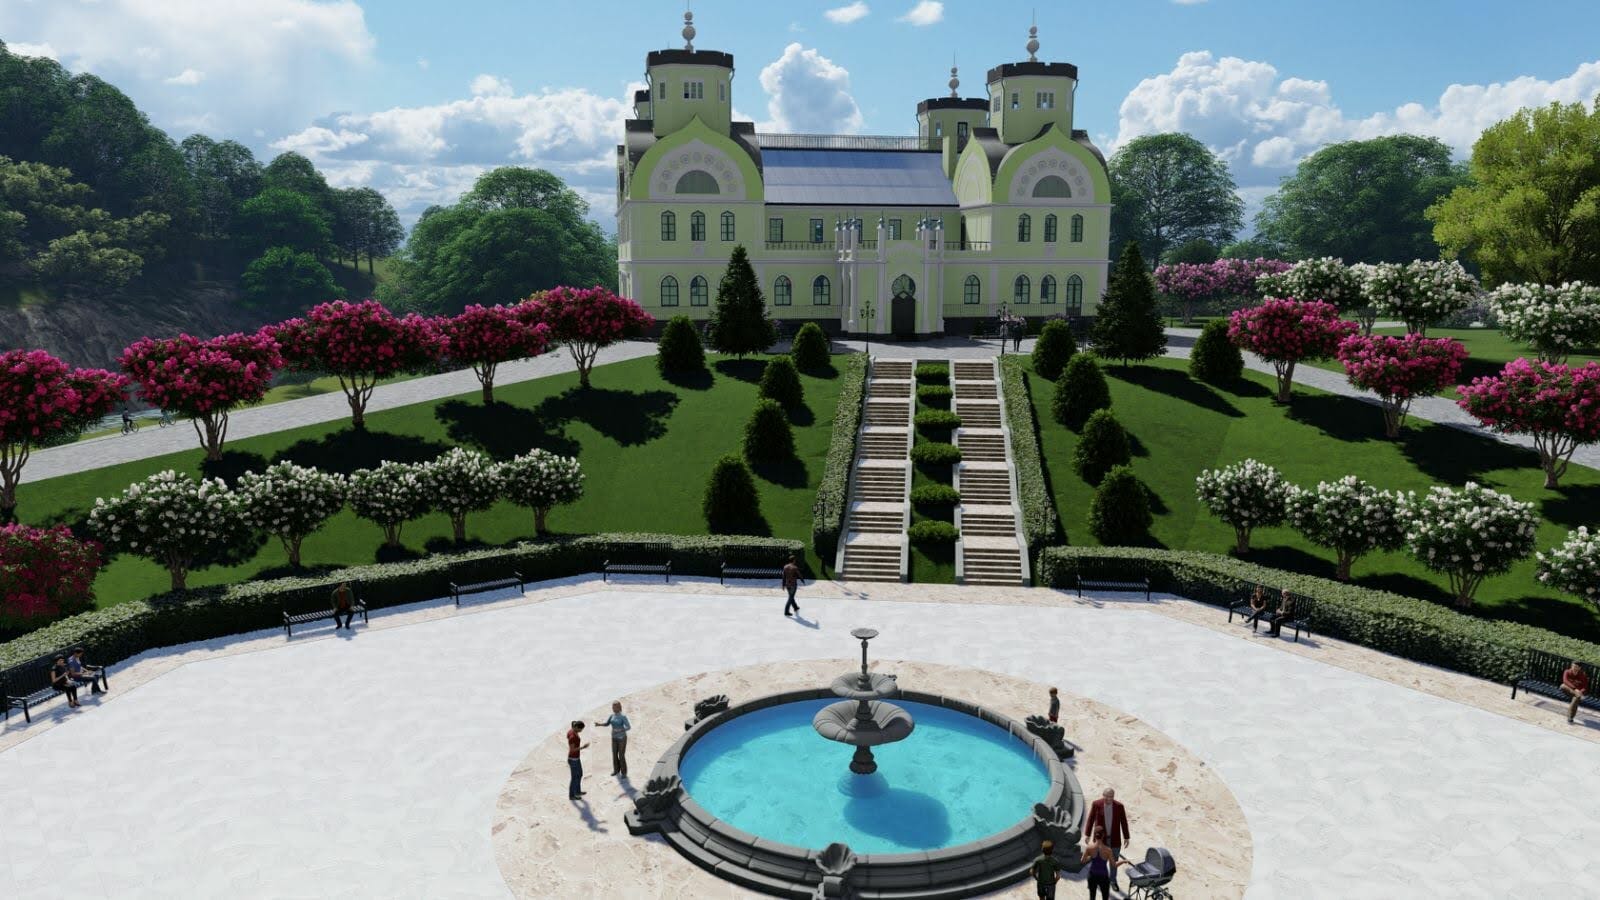 Visualization of the reconstruction of the reserve’s palace ensemble